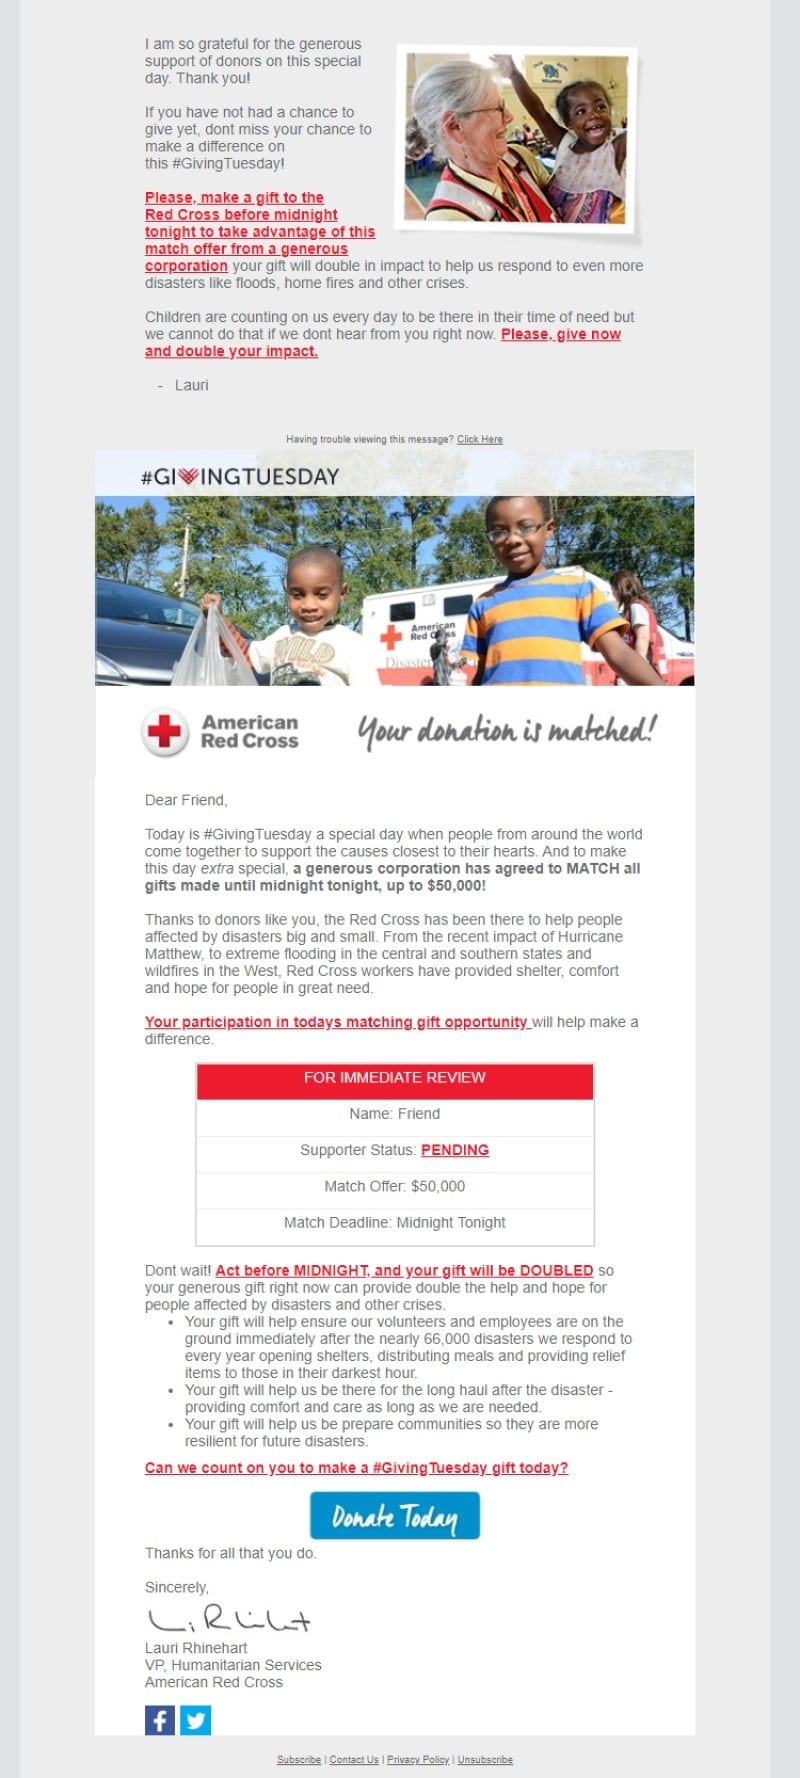 American Red Cross email showing an example of a Giving Tuesday letter from someone important